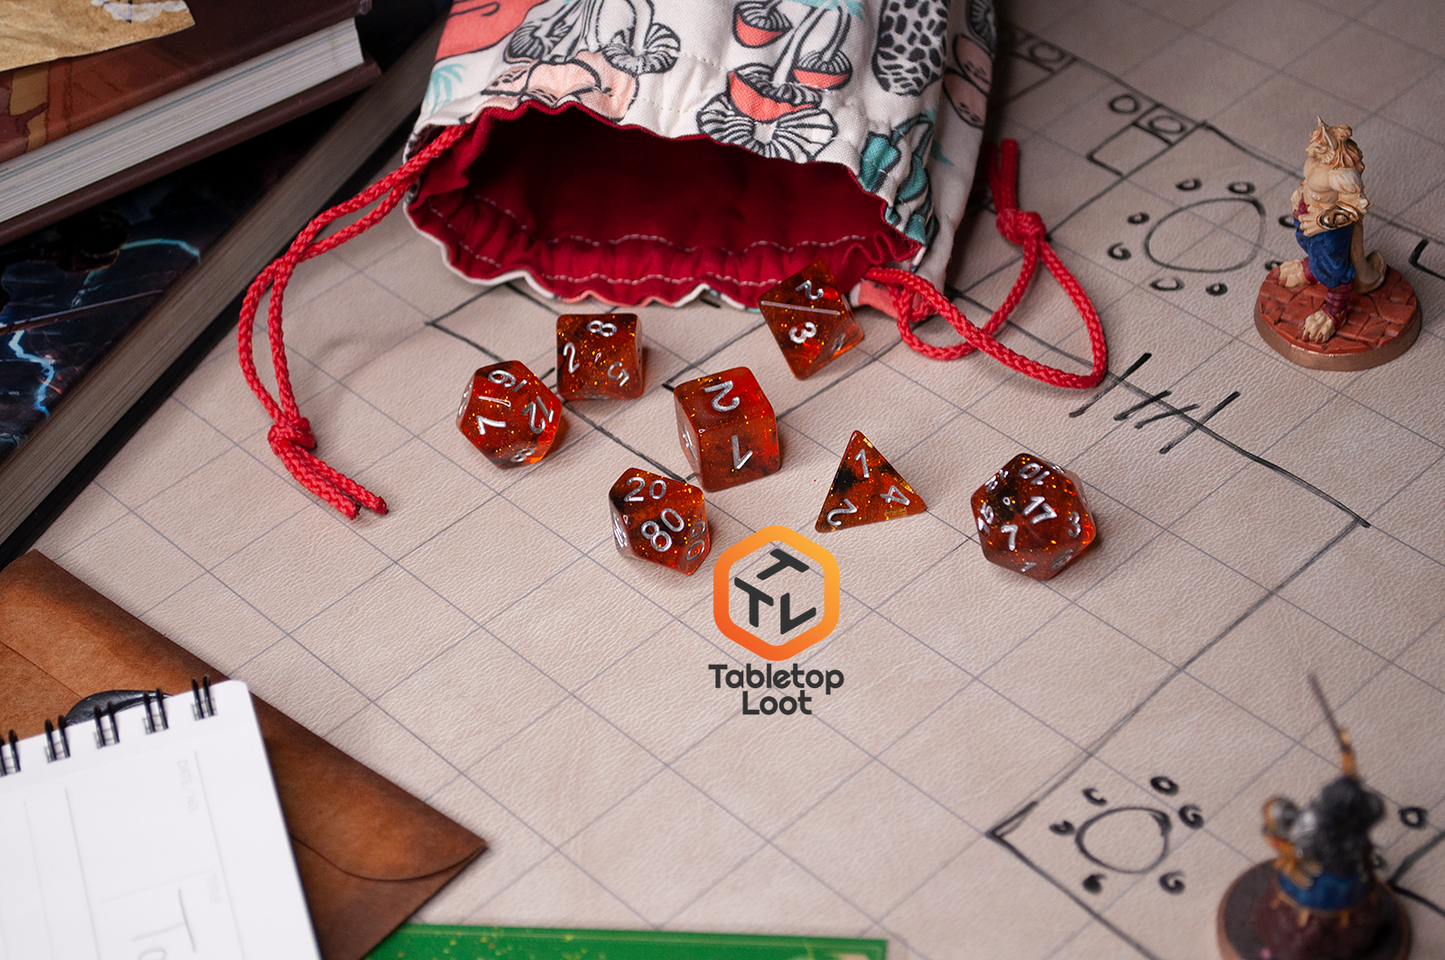 The Dissonant Whispers 7 piece dice set from Tabletop Loot with swirls of black in sparkling amber color, inked in silver, scattered across a game table.